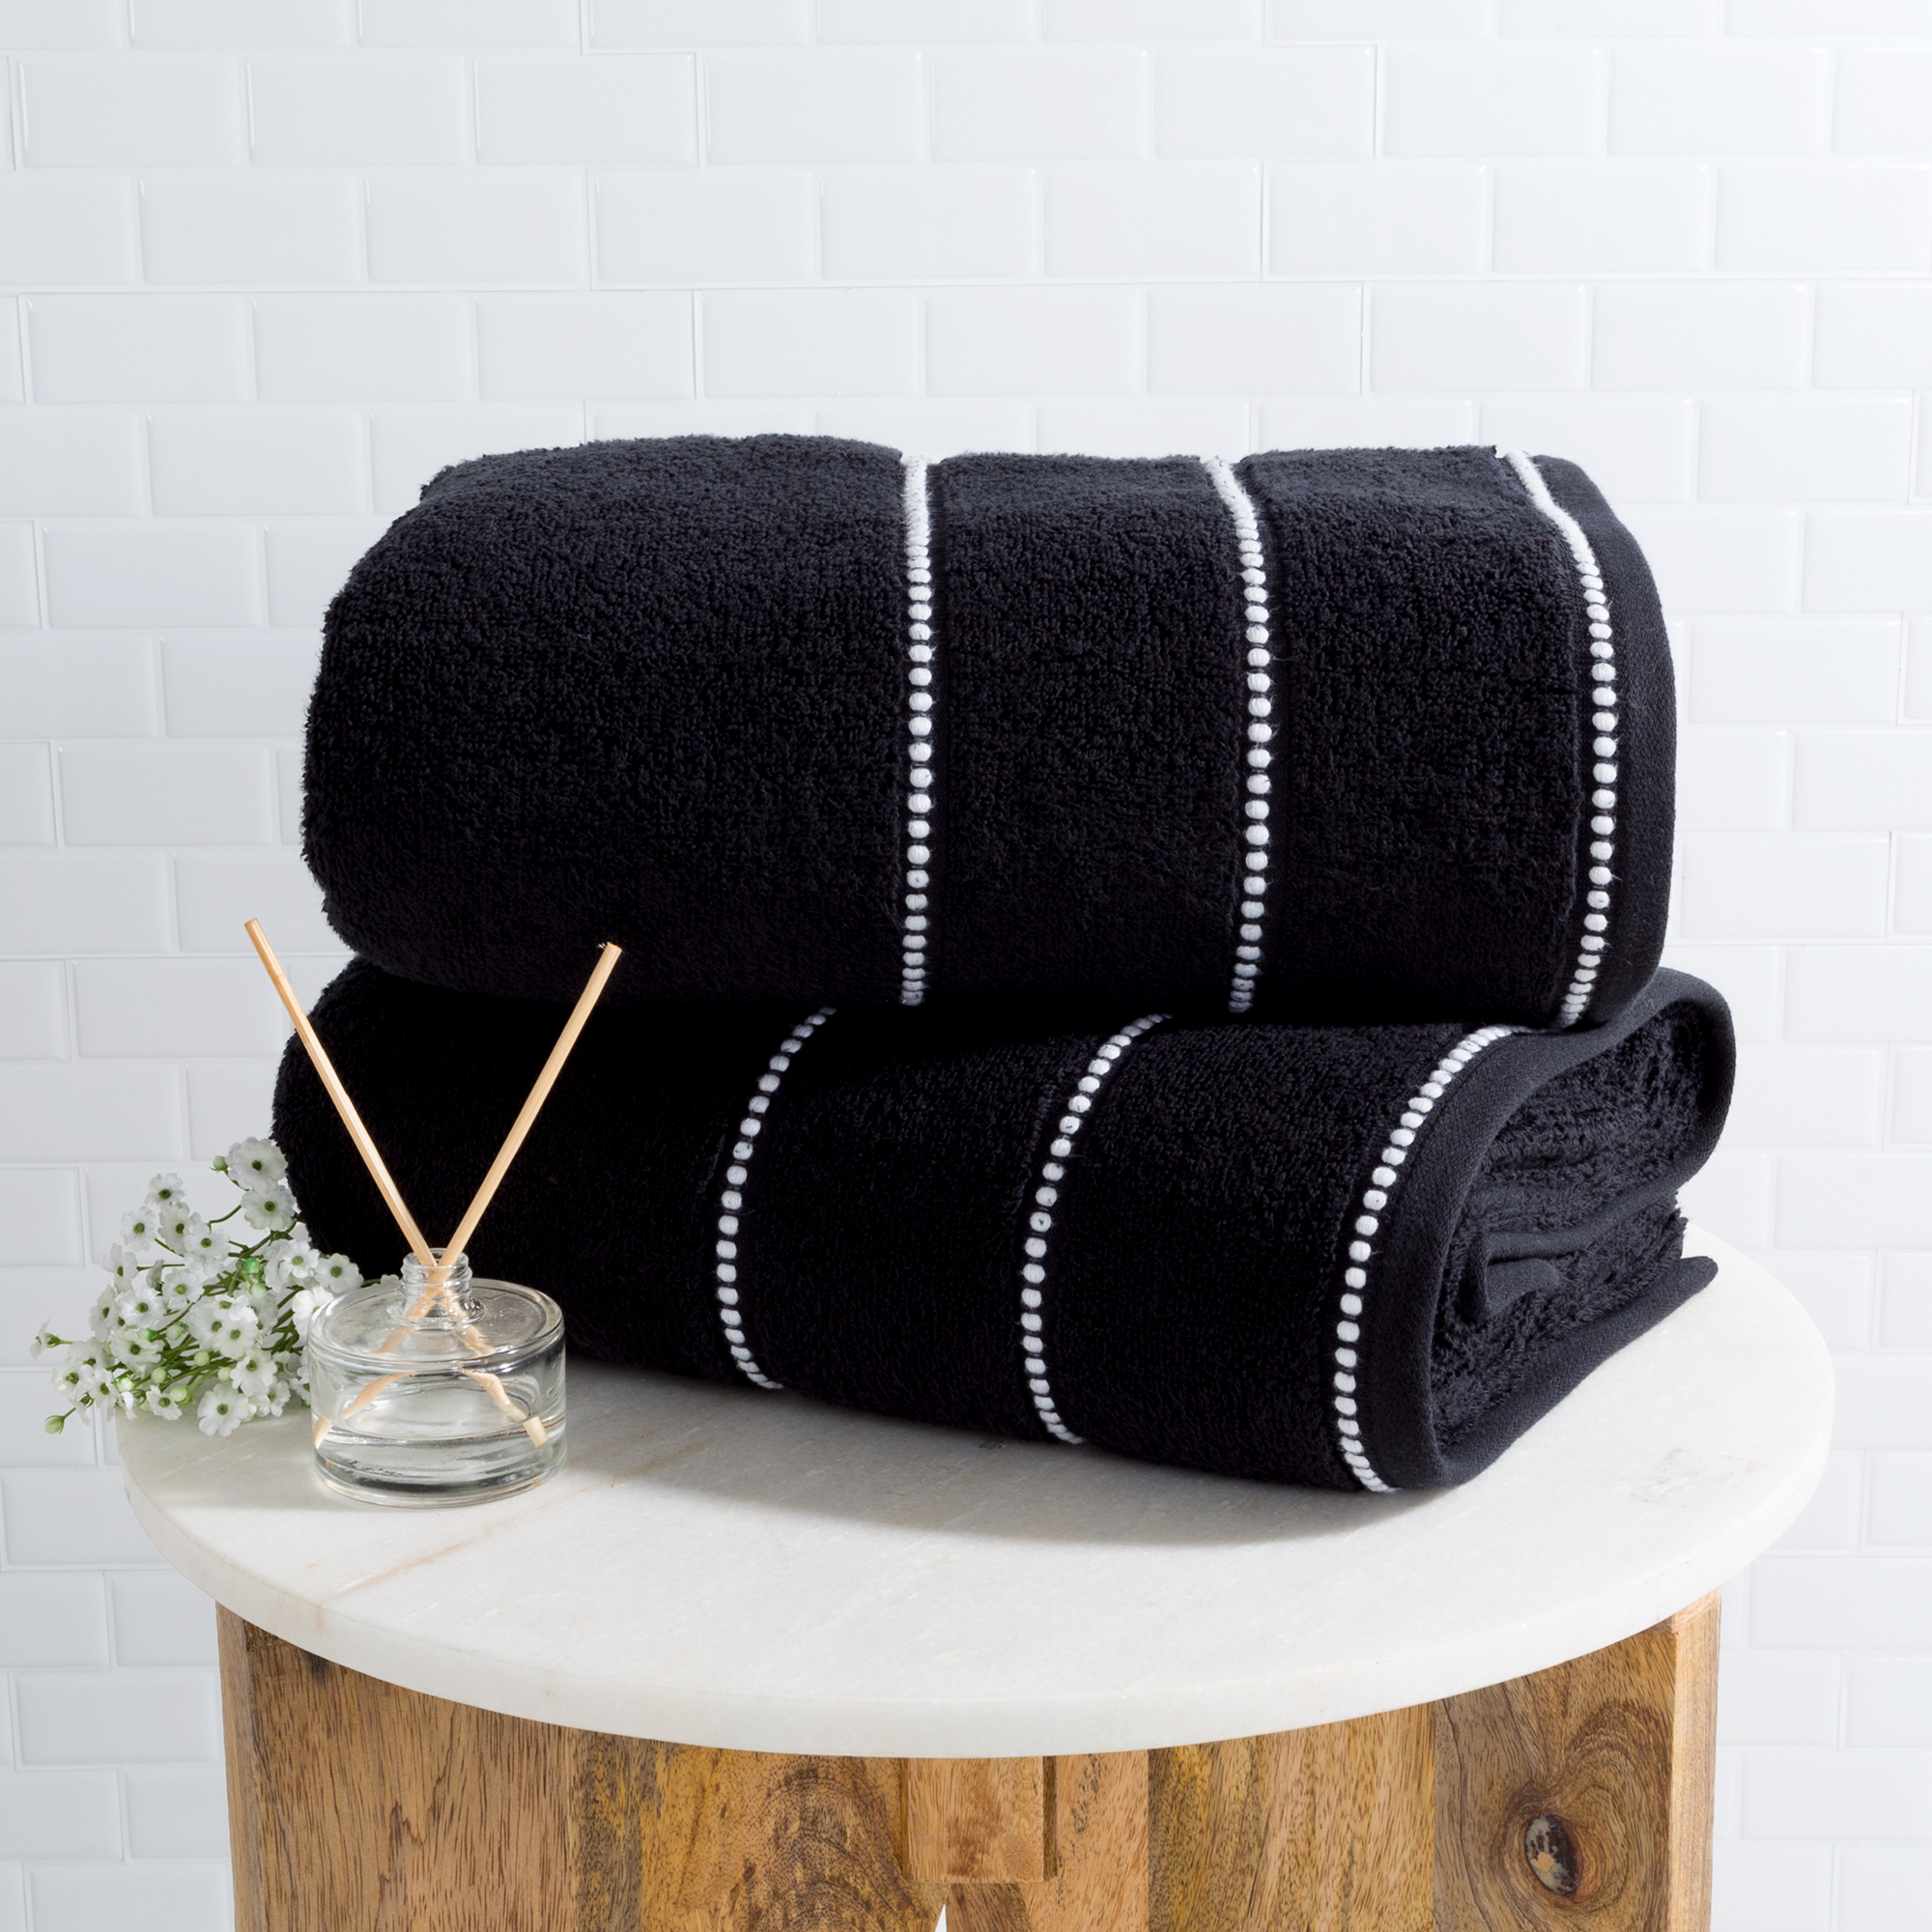 Luxurious Huge 34 X 68 In Cotton Towel Set- 2 Piece Bath Sheet Set Made From 100% Plush Cotton- Quick Dry, Soft And Absorbent Black